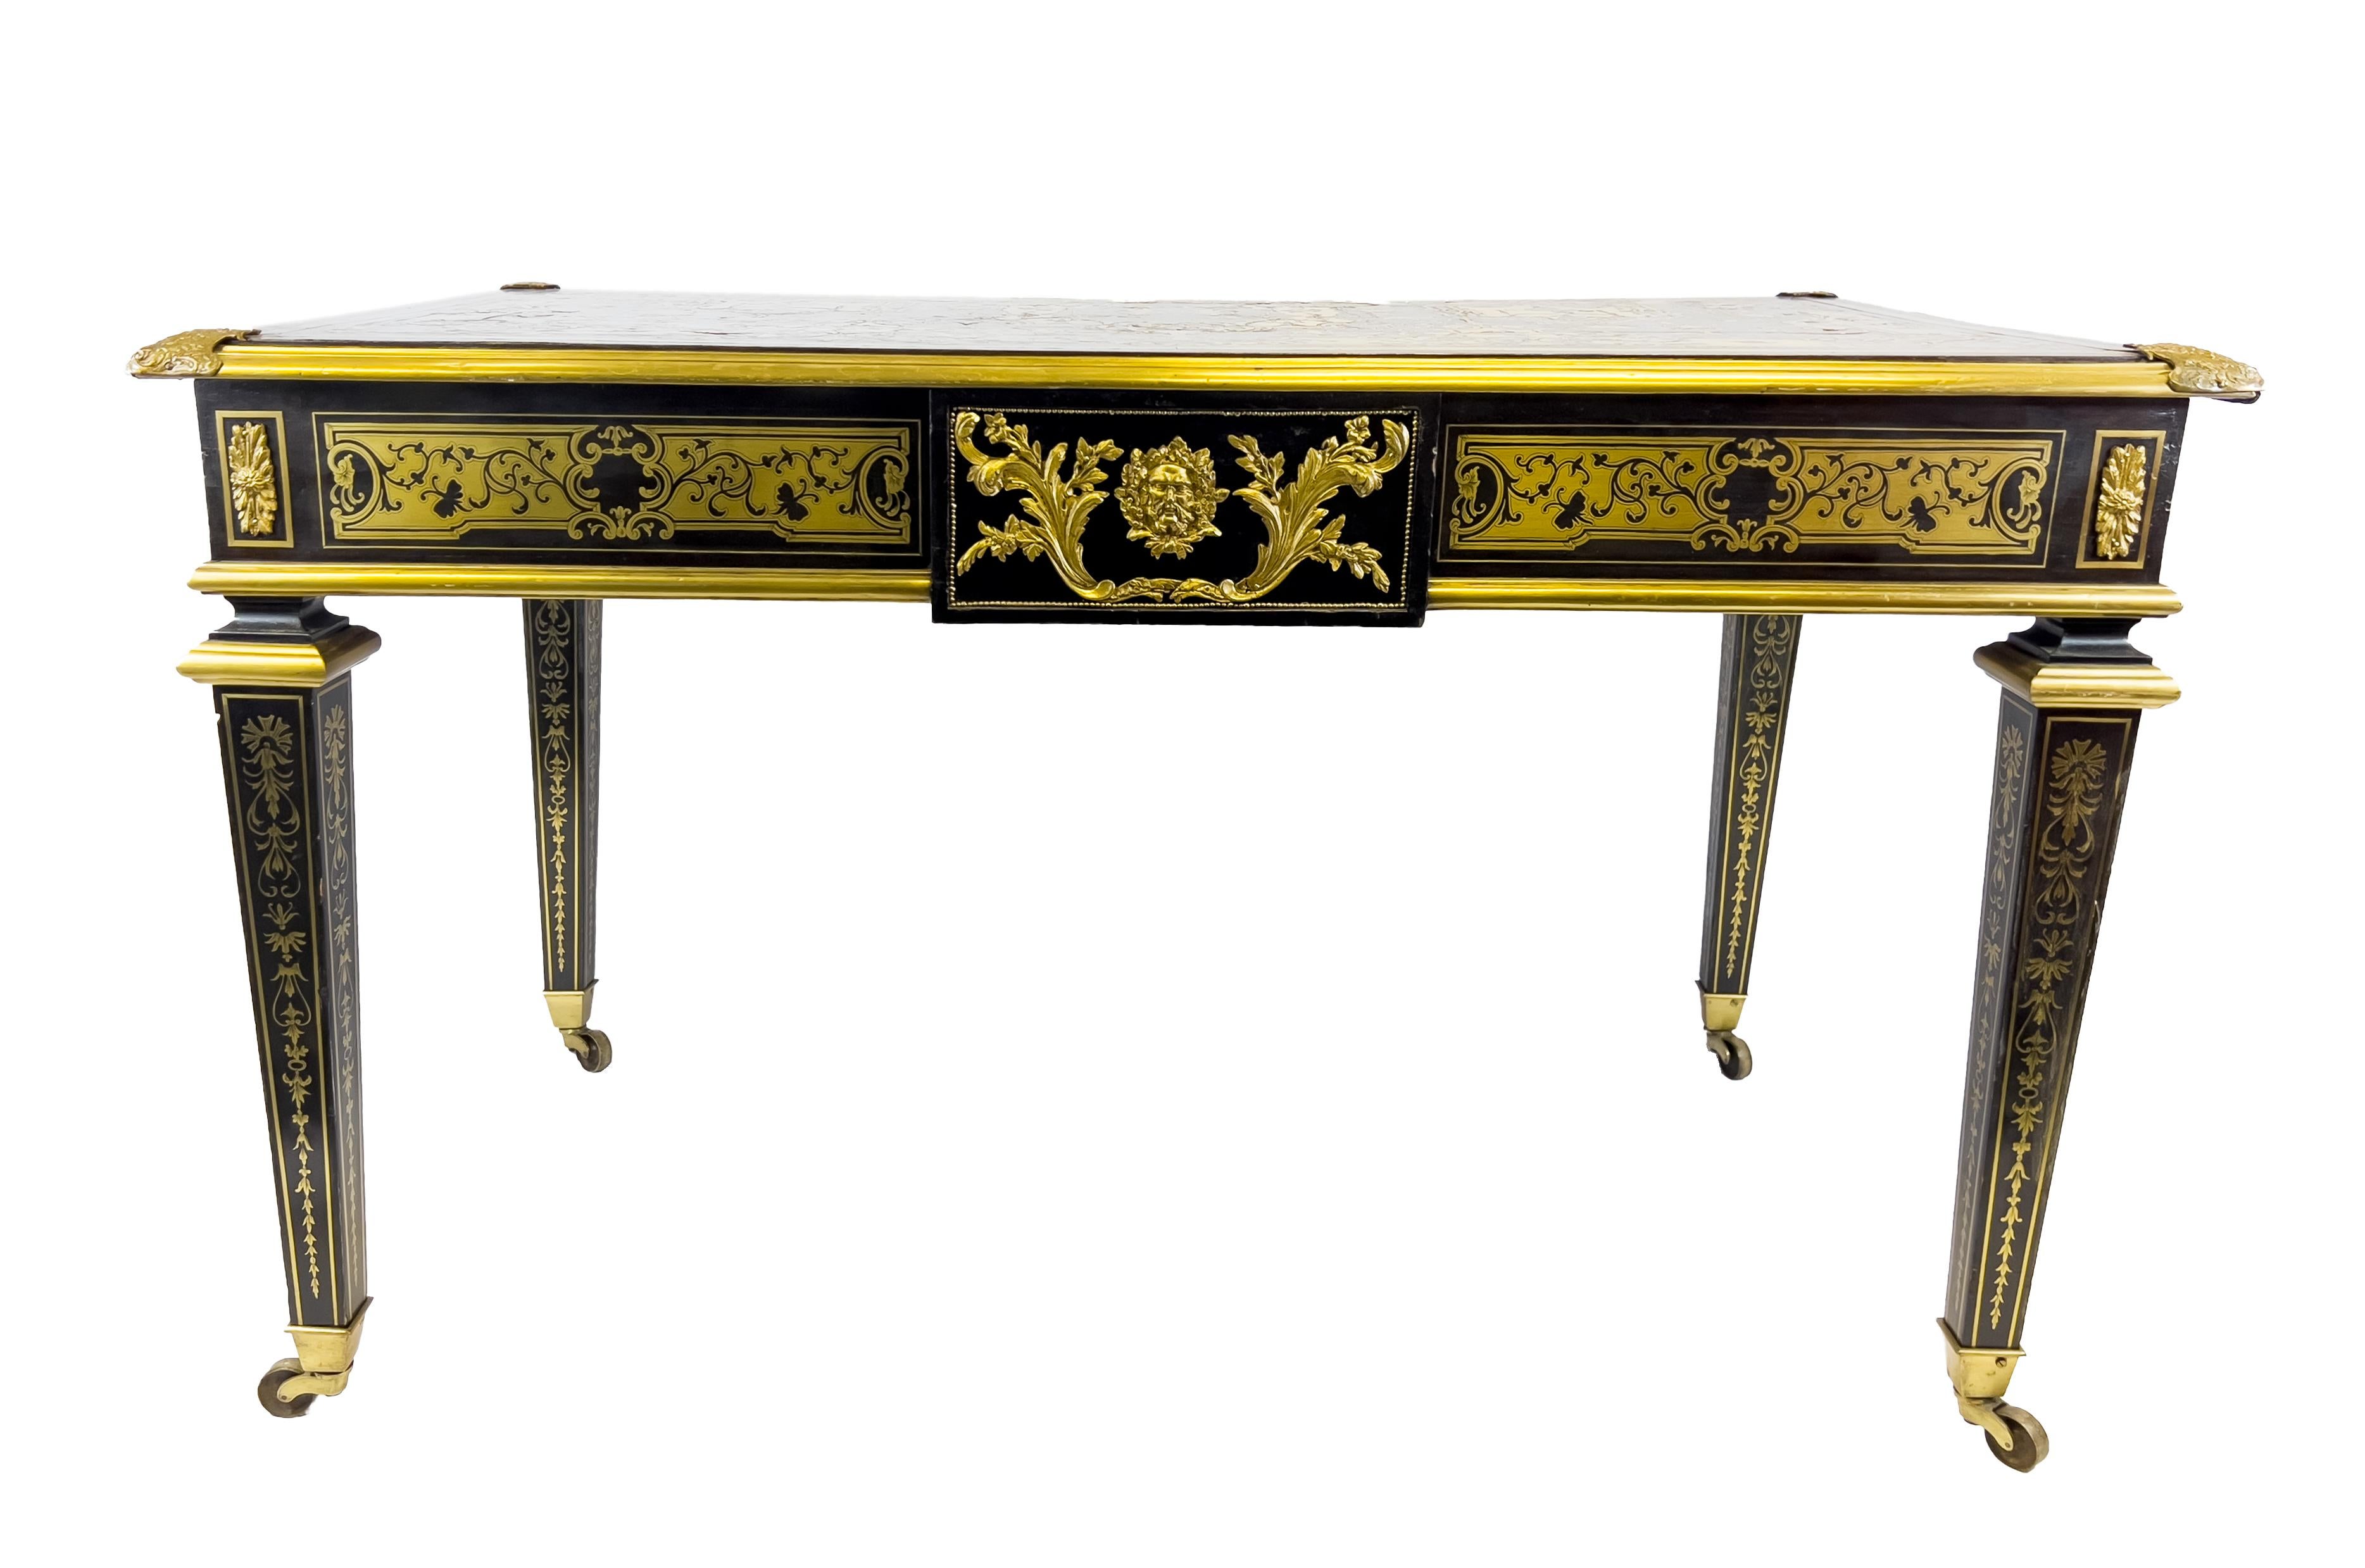 A fine 19th century French Boulle style desk, brass inlaid on a black background with classical scrolling designs all around and subjects to the top, three drawers to the front.
 